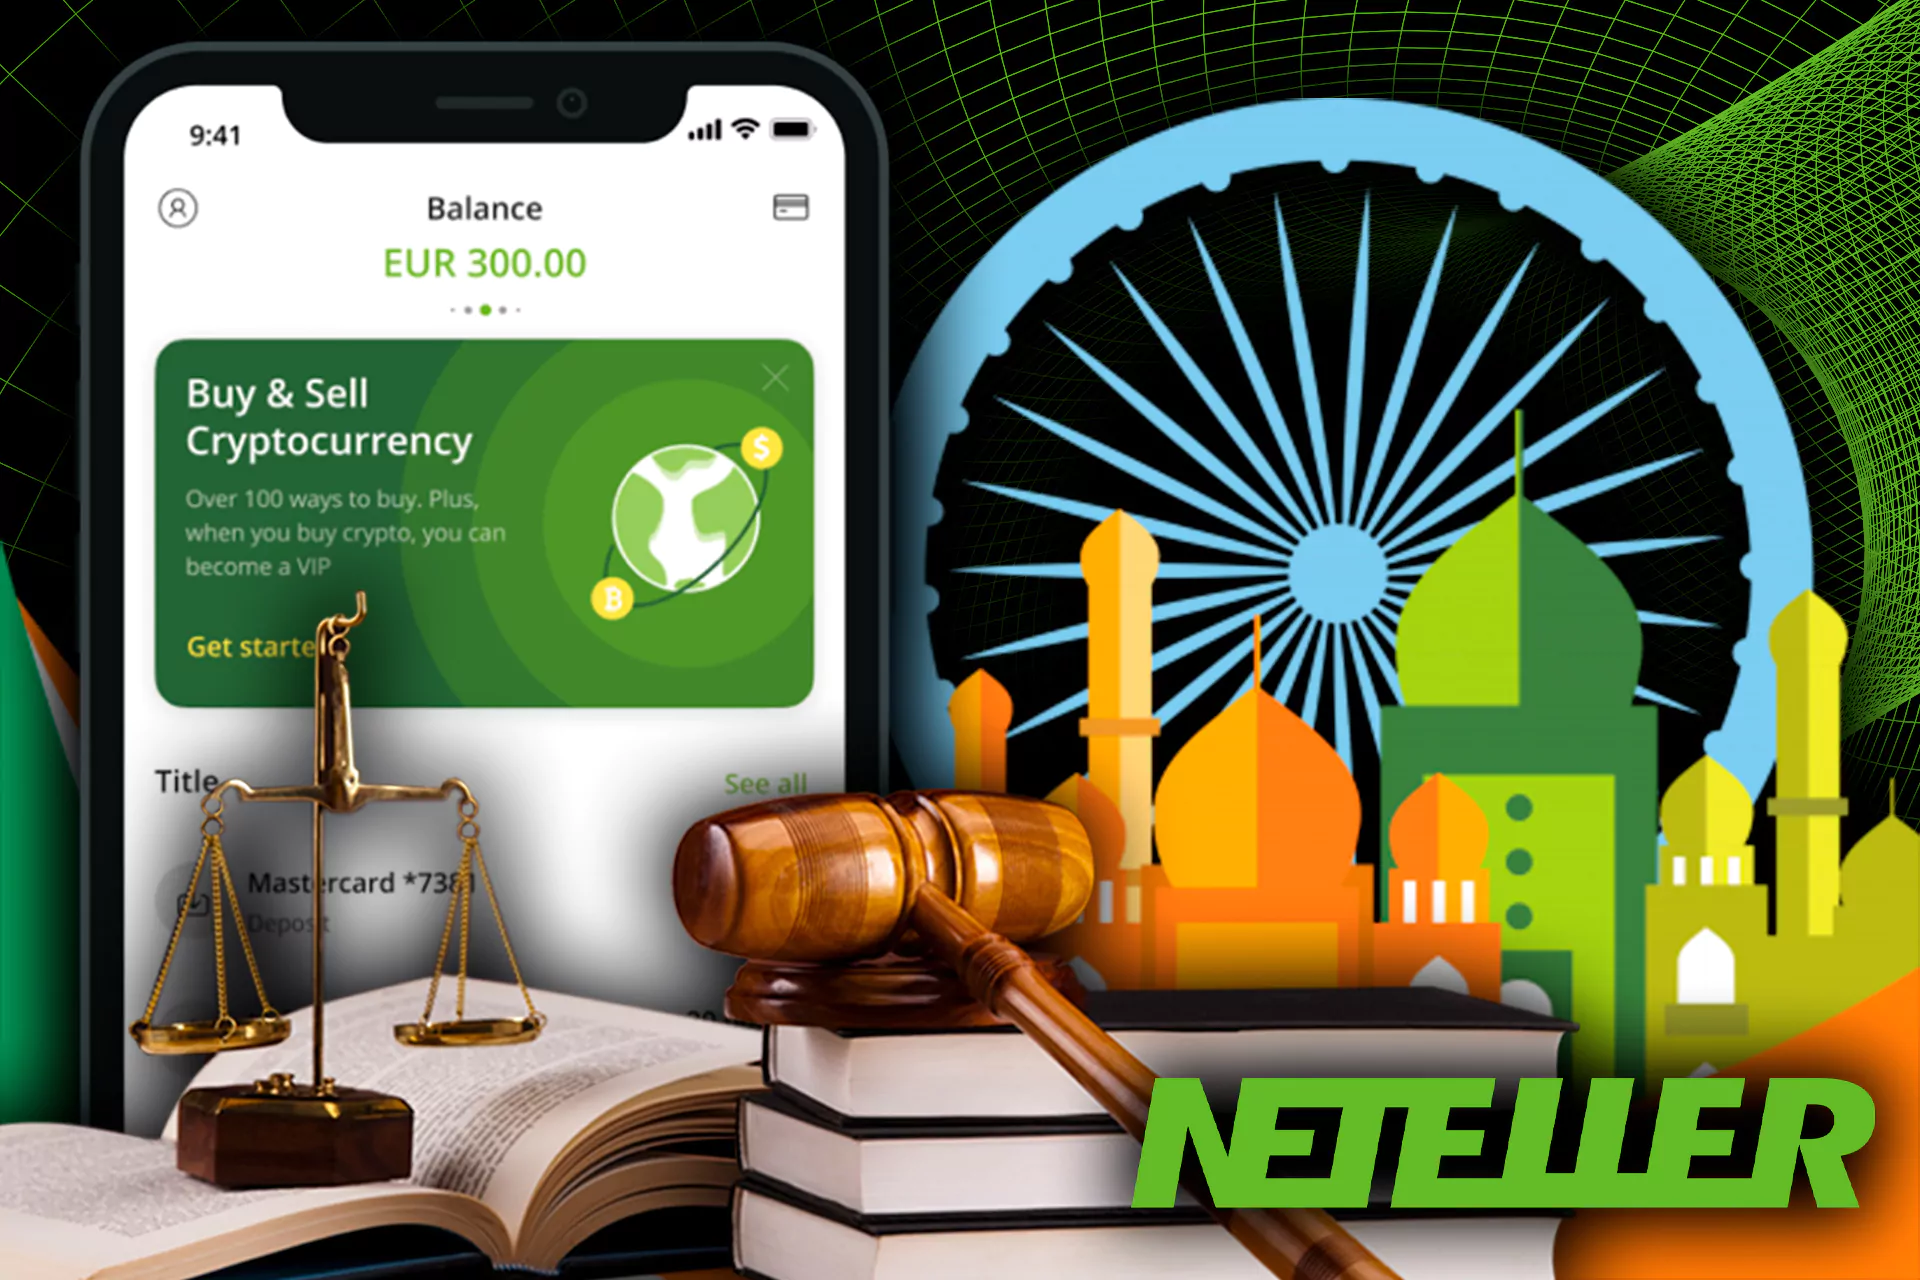 Neteller is legal for using in India.